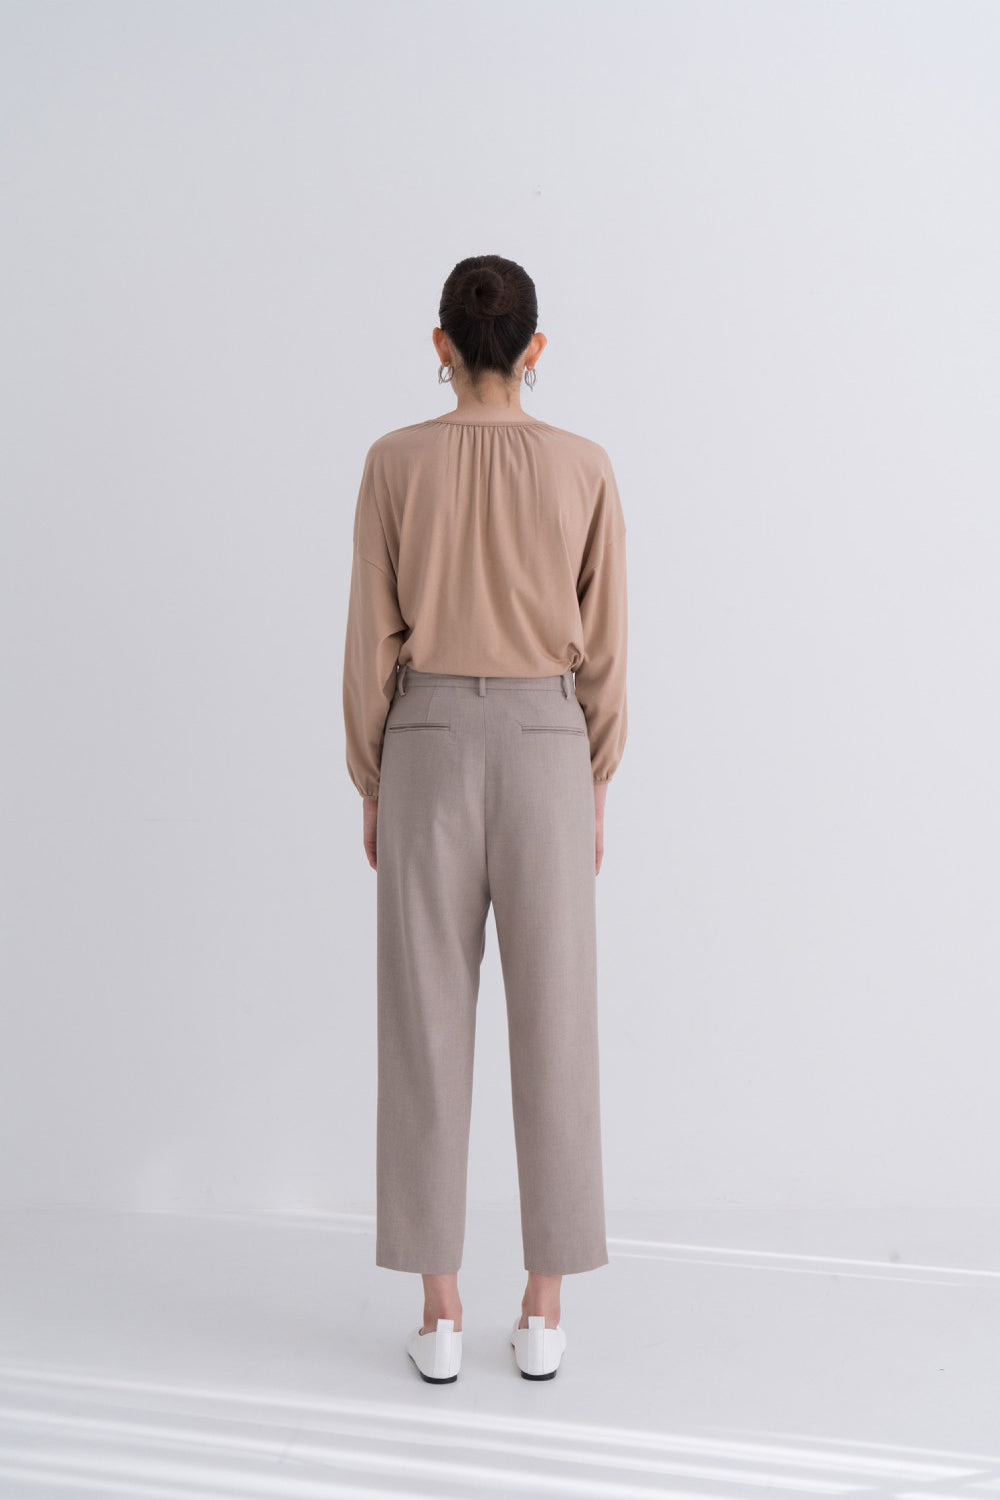 NOTA Comfy Pintuck Wool Pants Oatmeal Modest Ladies Loose Long Trousers with Pockets in Beige